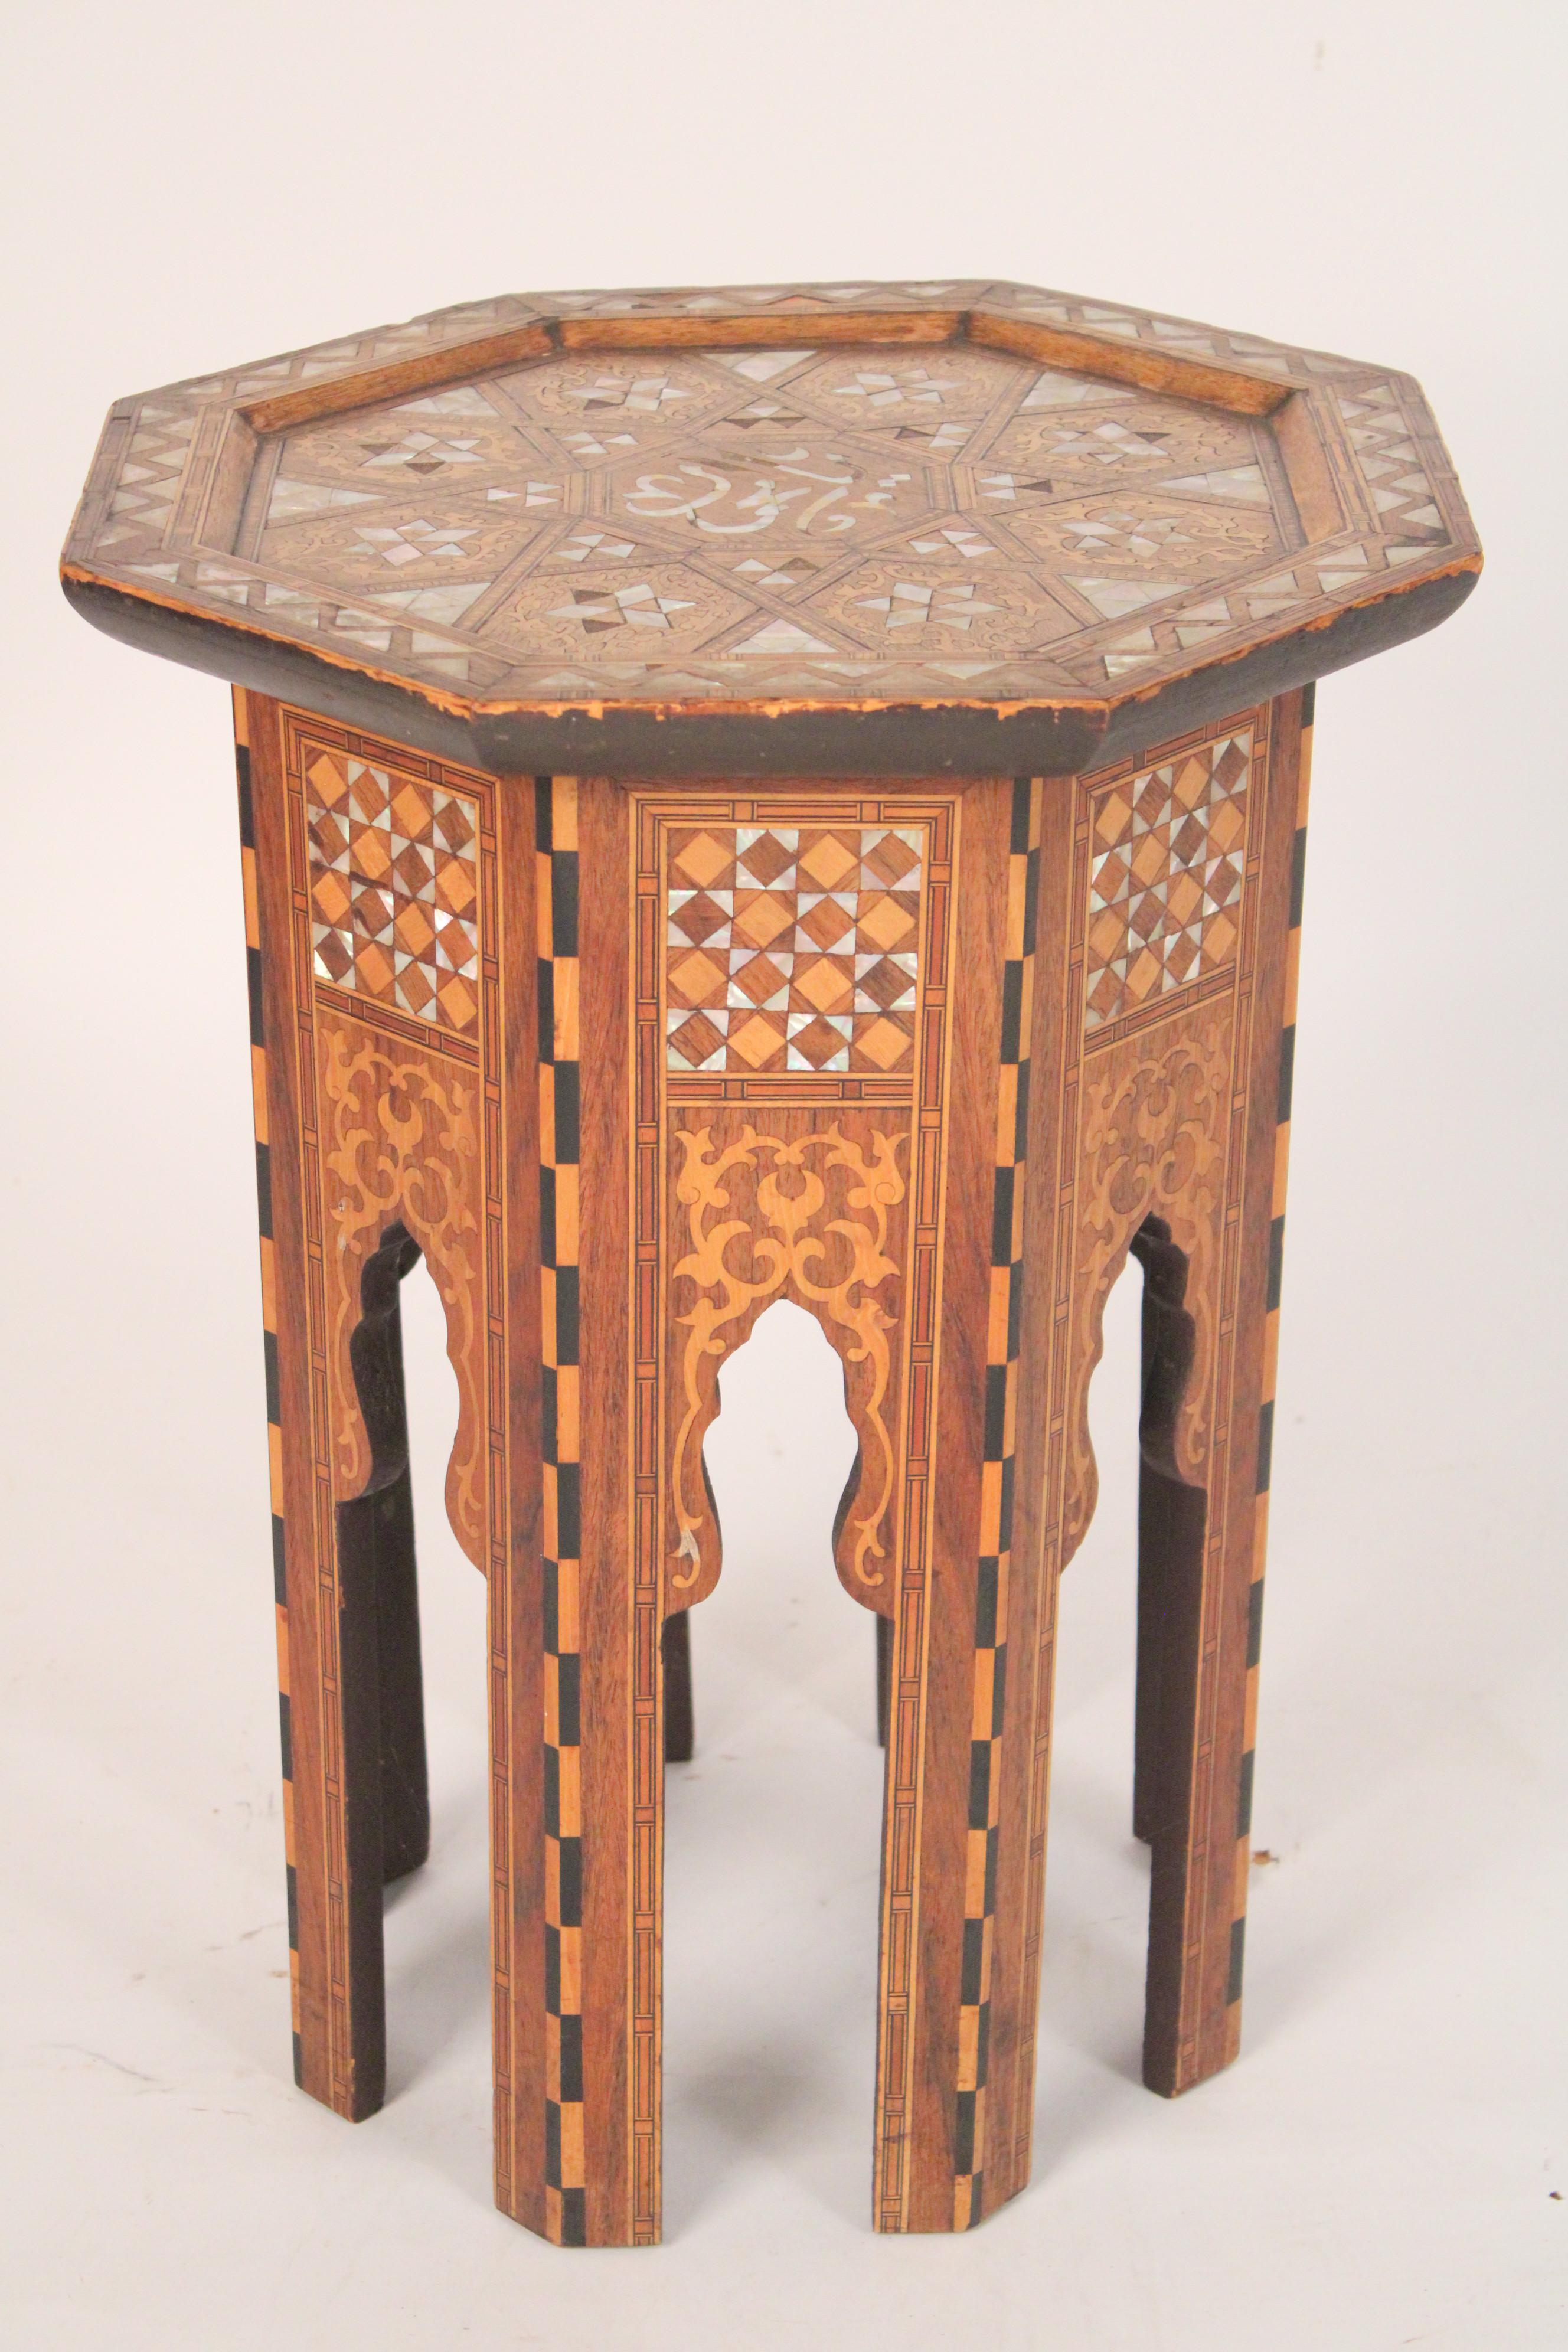 Middle Eastern mother of pearl inlaid octagonal shaped occasional table, circa 1960s. With both mother of pearl and wood inlays.